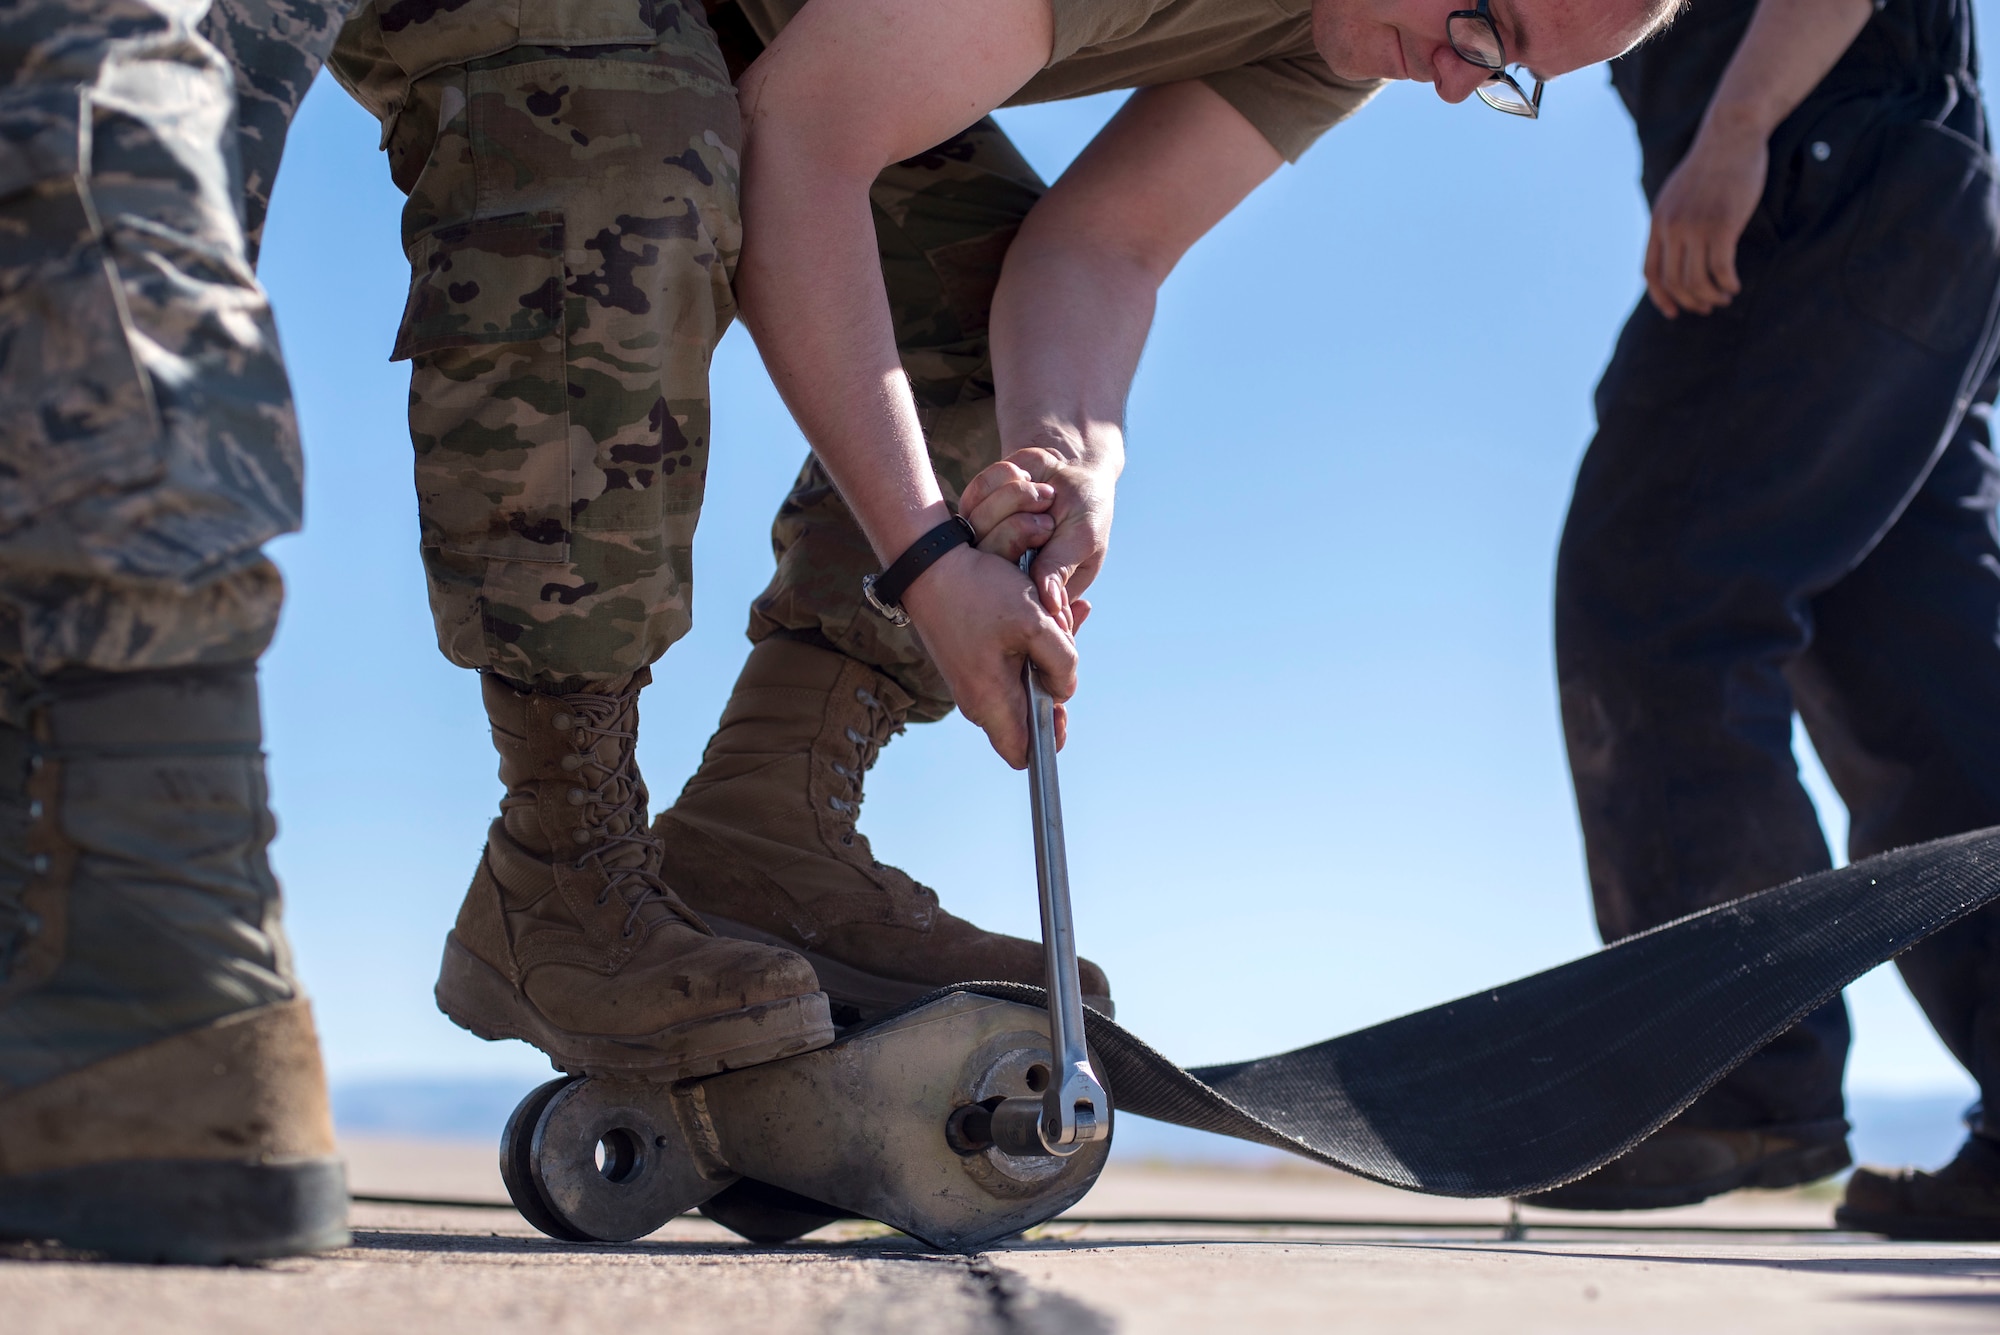 Airman 1st Class Curtis Mark, 49th Civil Engineer Squadron electrical power production technician, reinstalls a tape connector on the flightline, on Holloman Air Force Base, N.M., April 21, 2020. The tape connector is part of a BAK-15 Aircraft Arrest System Barrier, which helps pilots safely stop their aircraft in case of an aircraft emergency. (U.S. Air Force photo by Staff Sgt. Christine Groening)